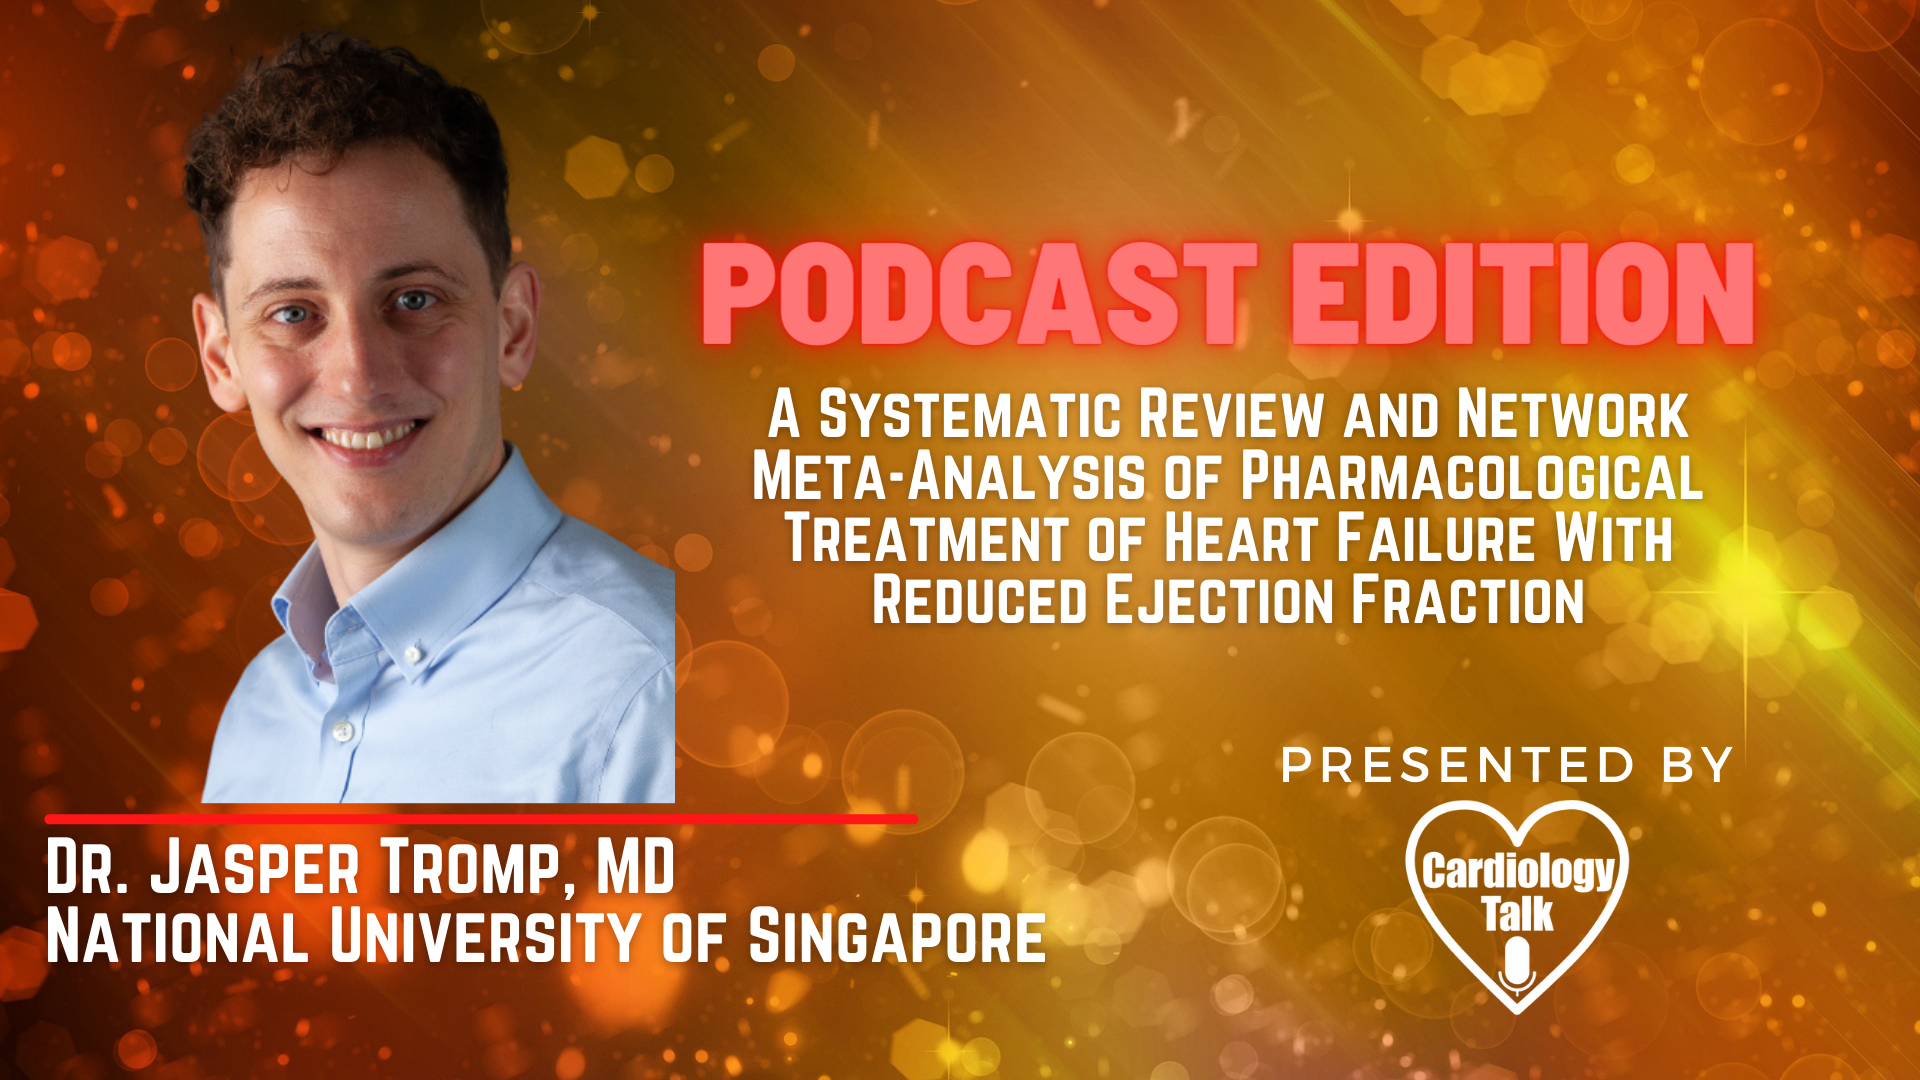 Podcast- Dr. Jasper Tromp, MD- A Systematic Review and Network-Meta-Analysis of Pharmacological Treatment of Heart Failure With Reduced Ejection Fraction @DrJasper1 #EjectionFraction #Hea...